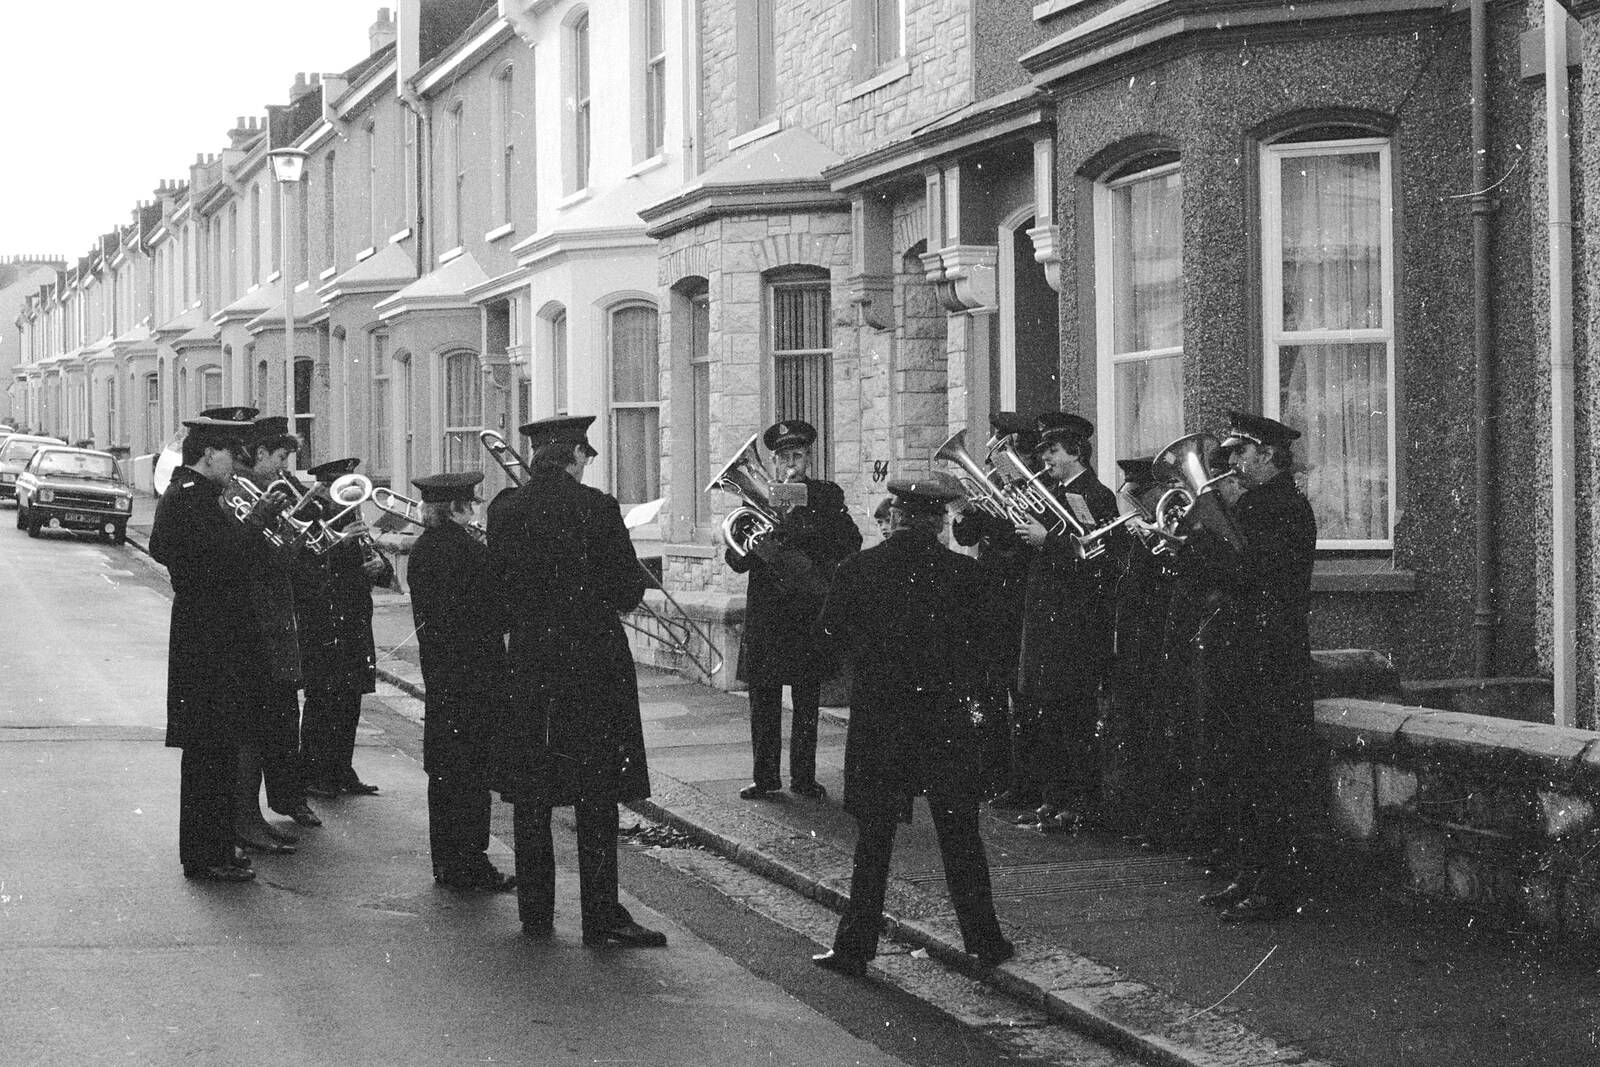 The Salvation Army band on Beaumont Street from Uni: Beaumont Street Decorations and Water Fight, Plymouth - 14th December 1985